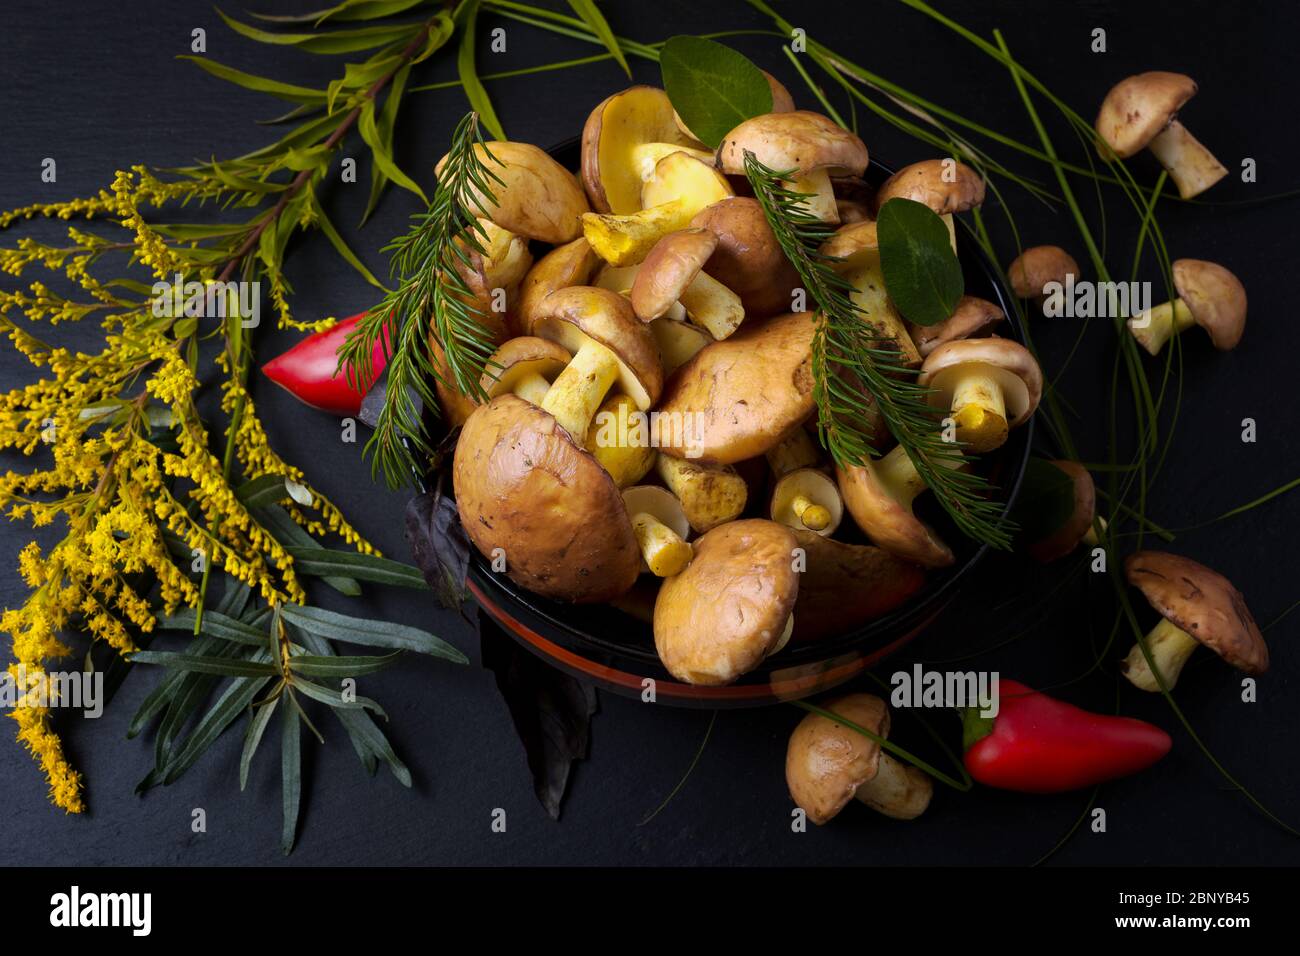 Rustic bowl with forest picking slippery Jack mushrooms and wild grass on the black background, close up. Vegetarian healthy food concept Stock Photo